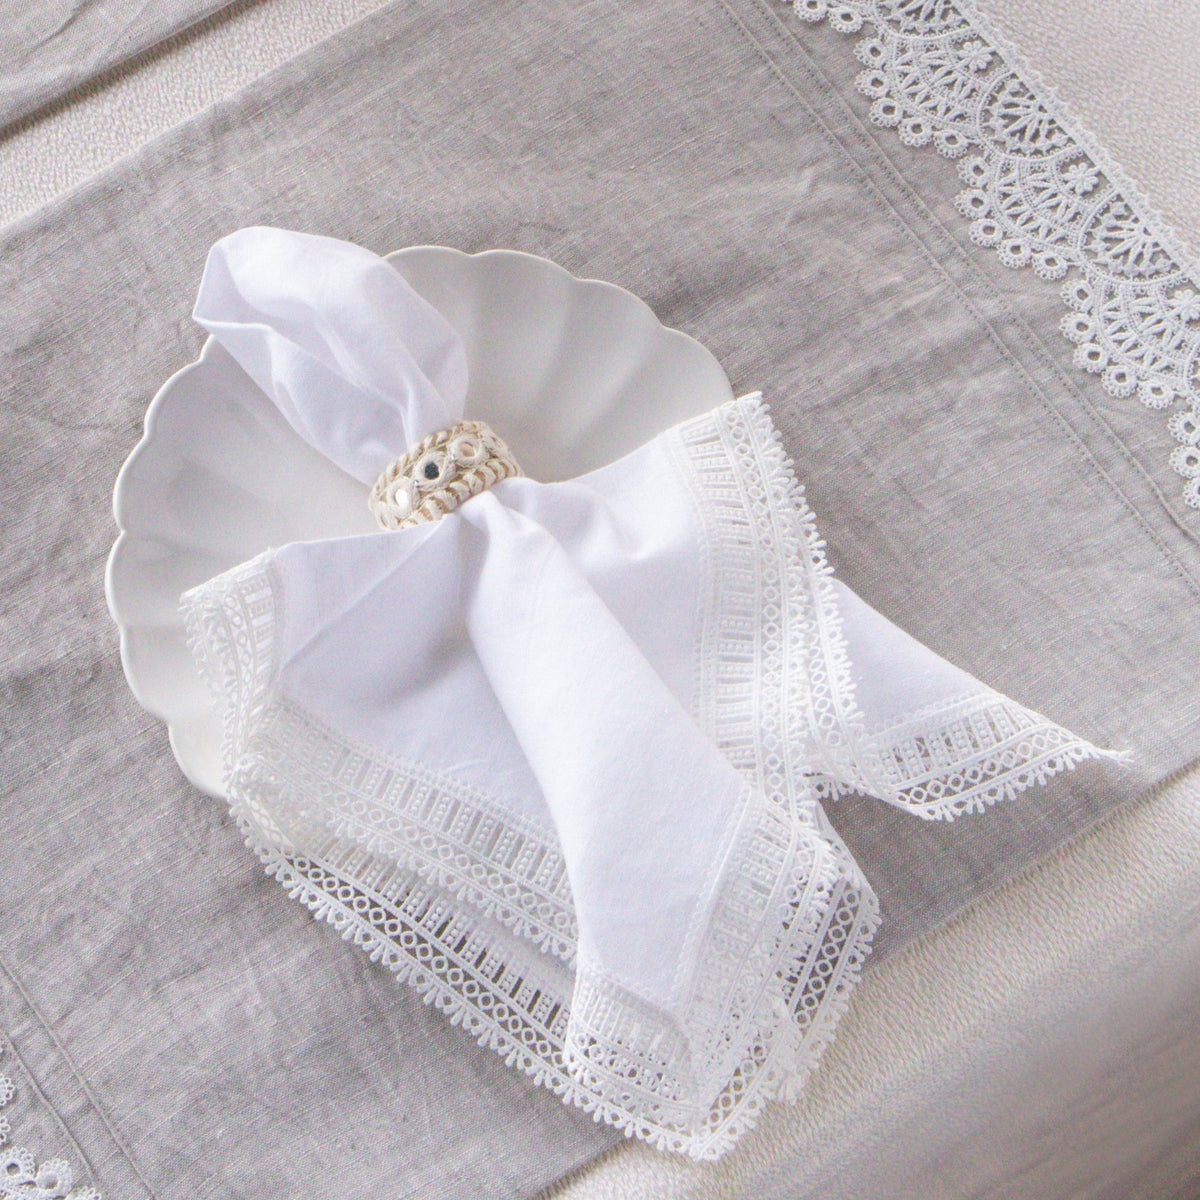 Grey with White Lace Napkin